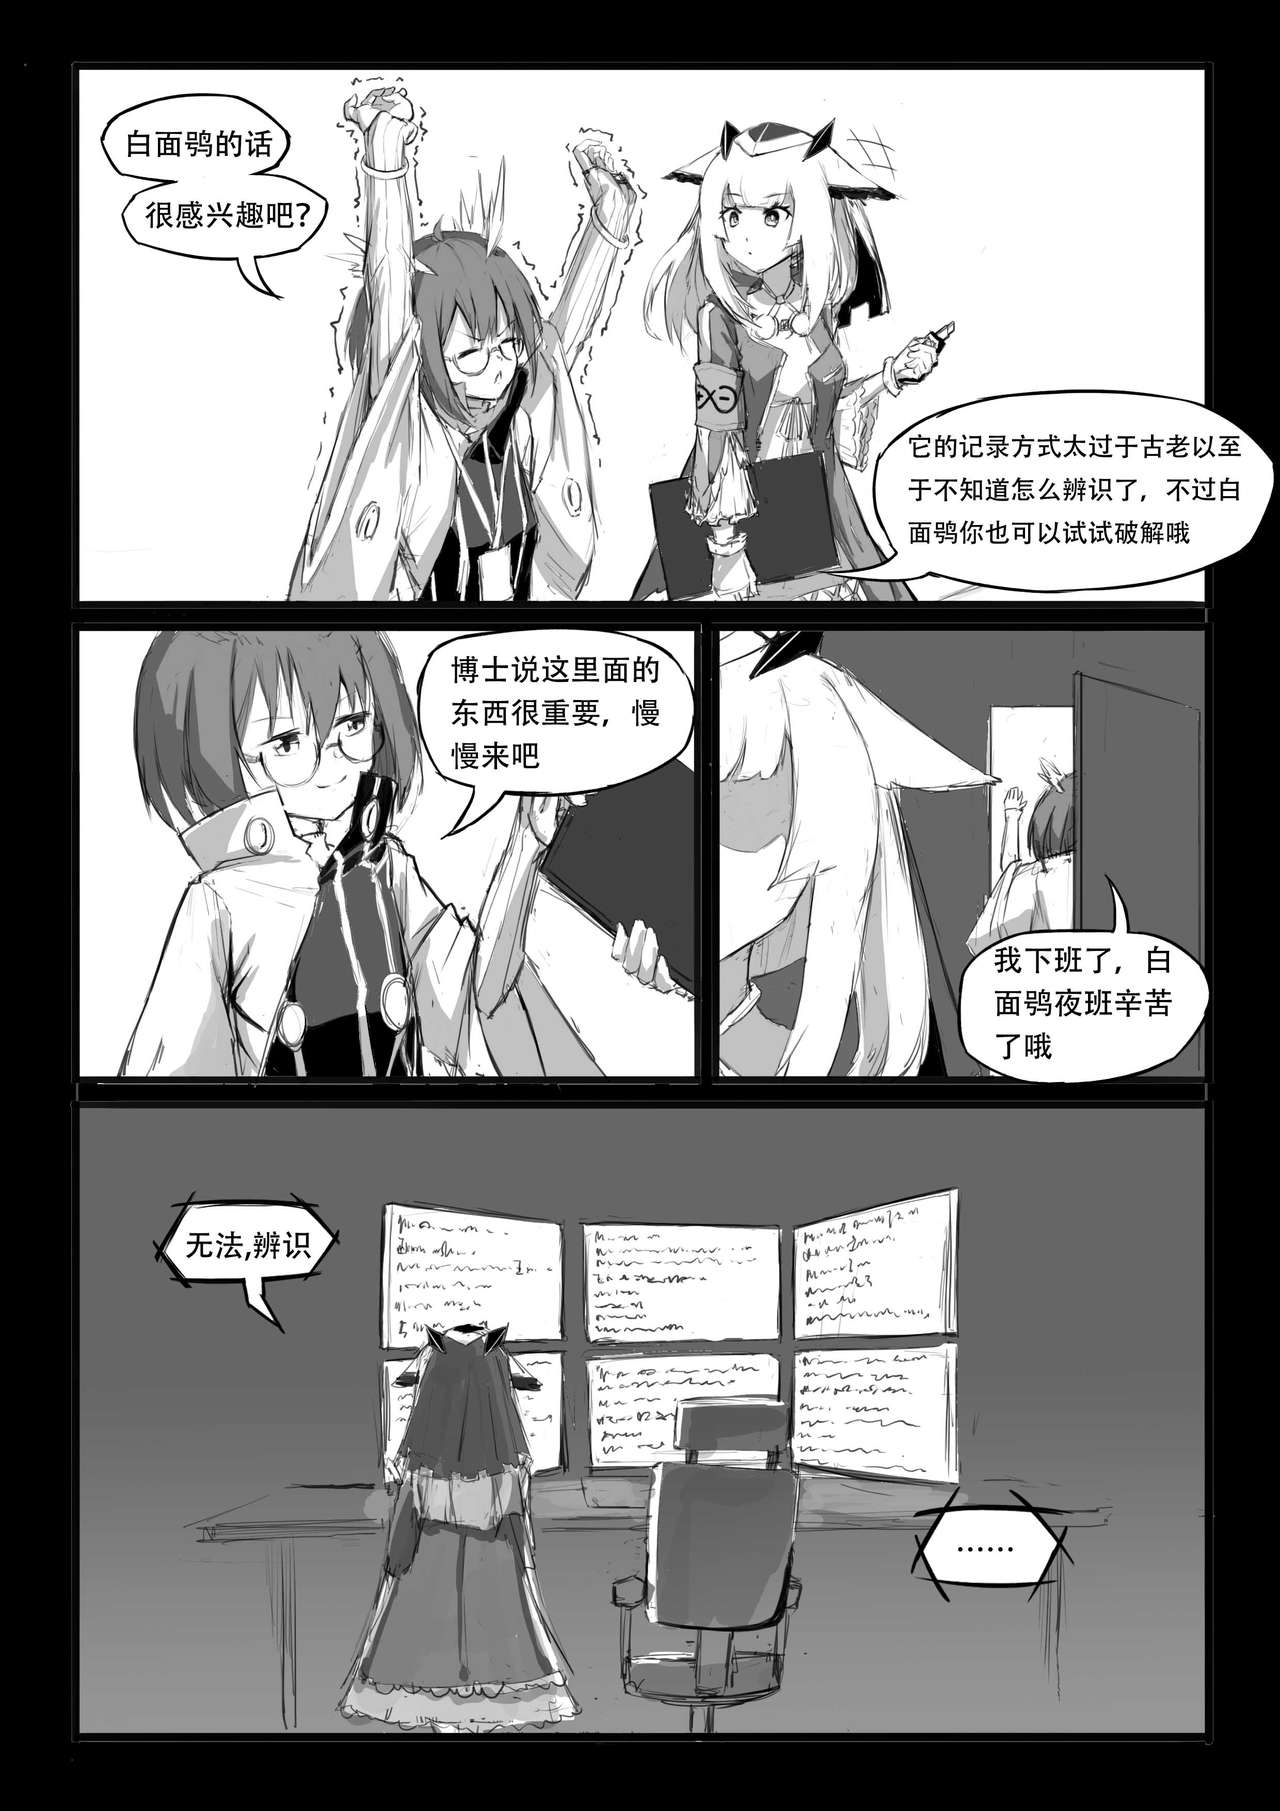 [saluky] 关于白面鸮变成了幼女这件事 (Arknights) [Chinese] page 4 full